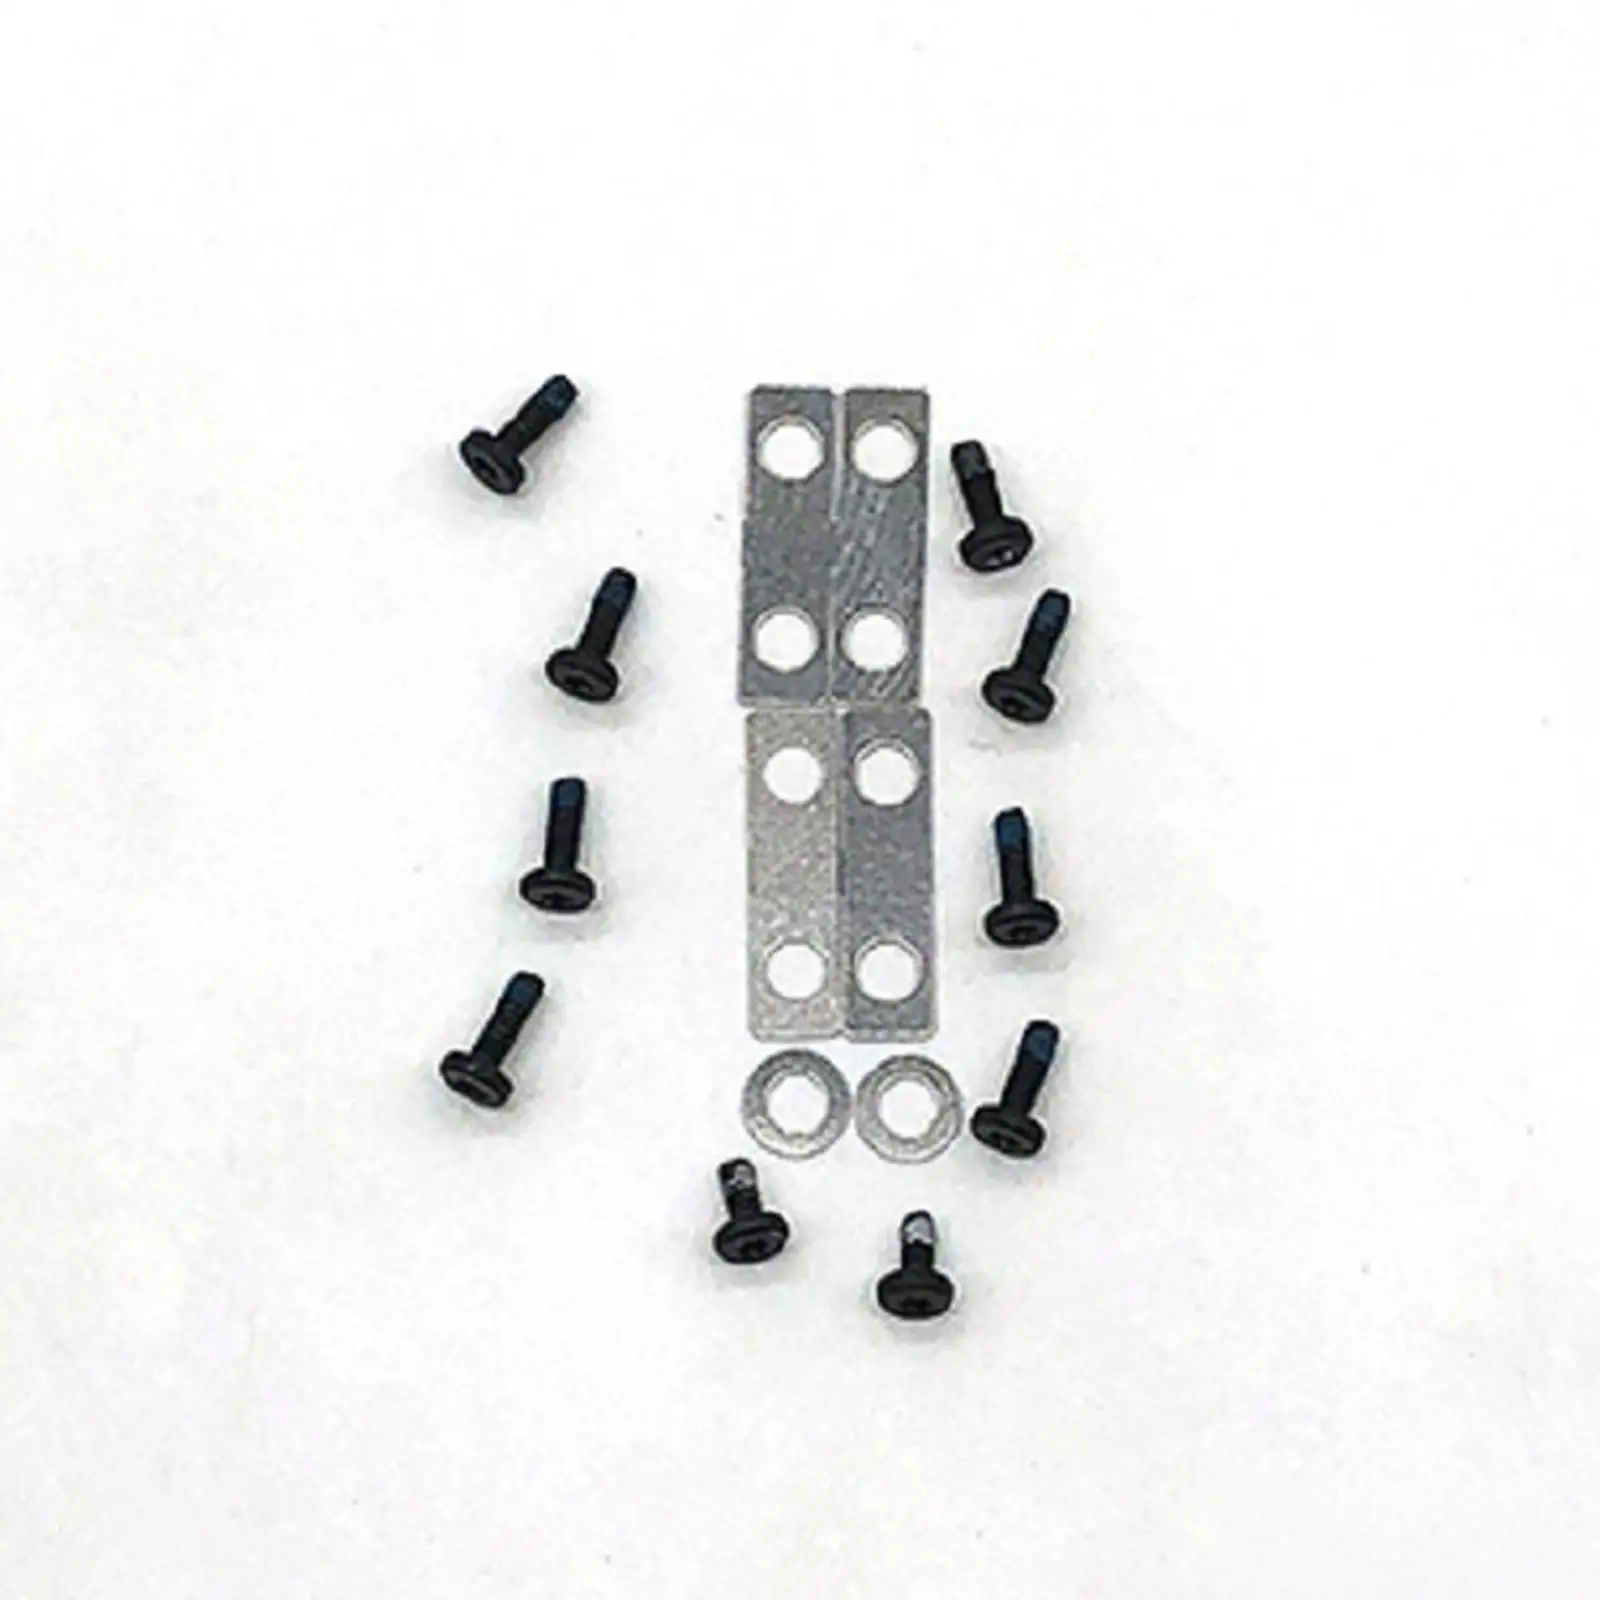 Trackpad Screws Gasket Set for  Pro Air A1706 A1707 A1708 A1932